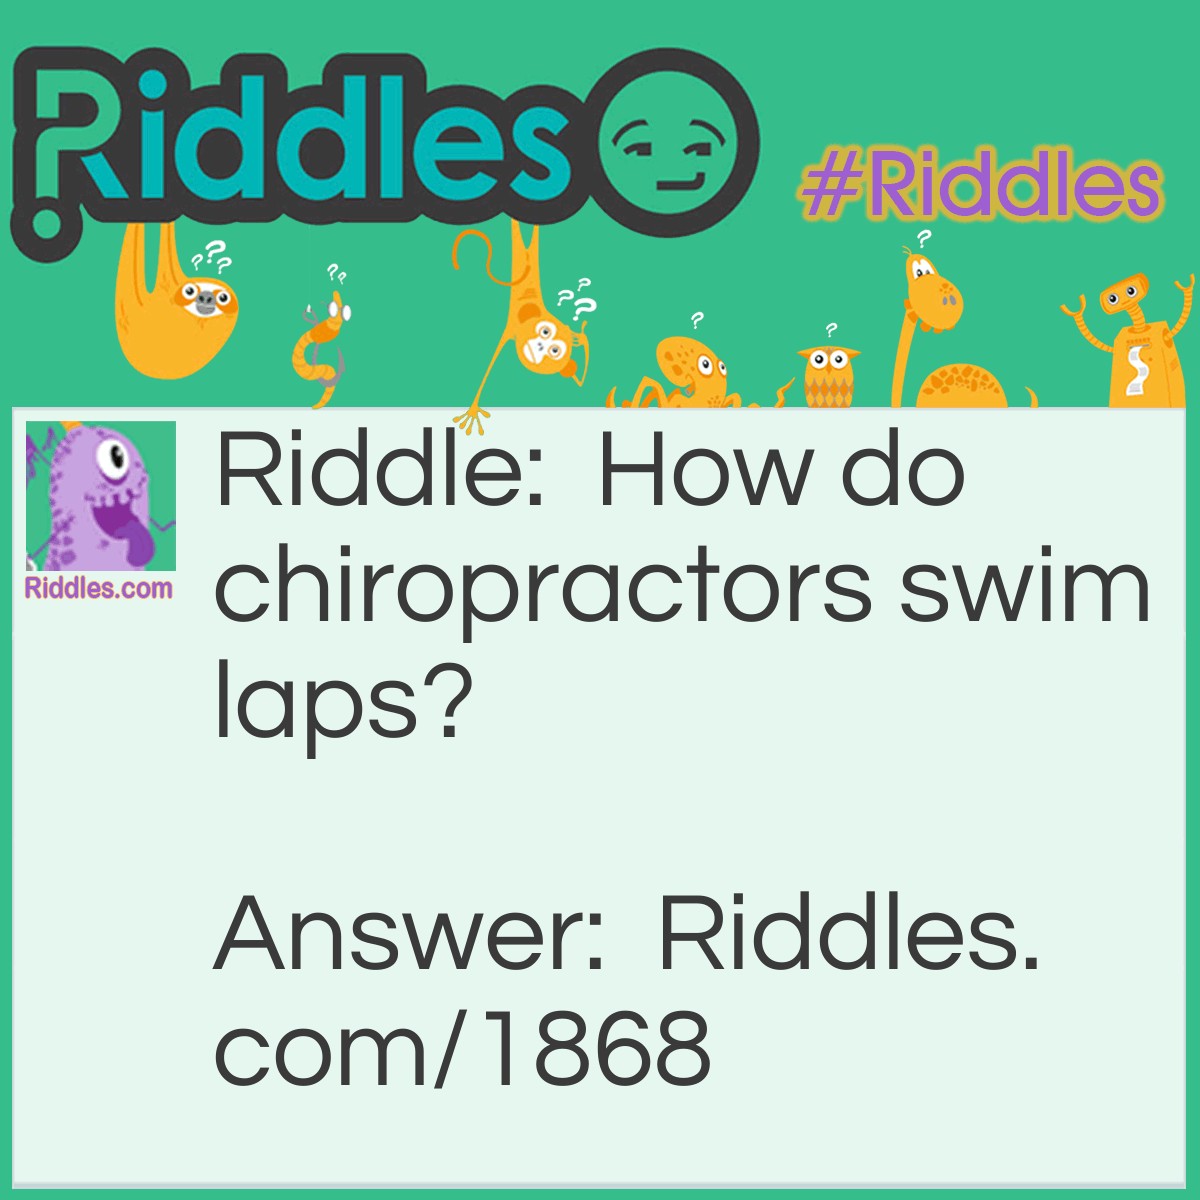 Riddle: How do chiropractors swim laps? Answer: They do the back stroke.